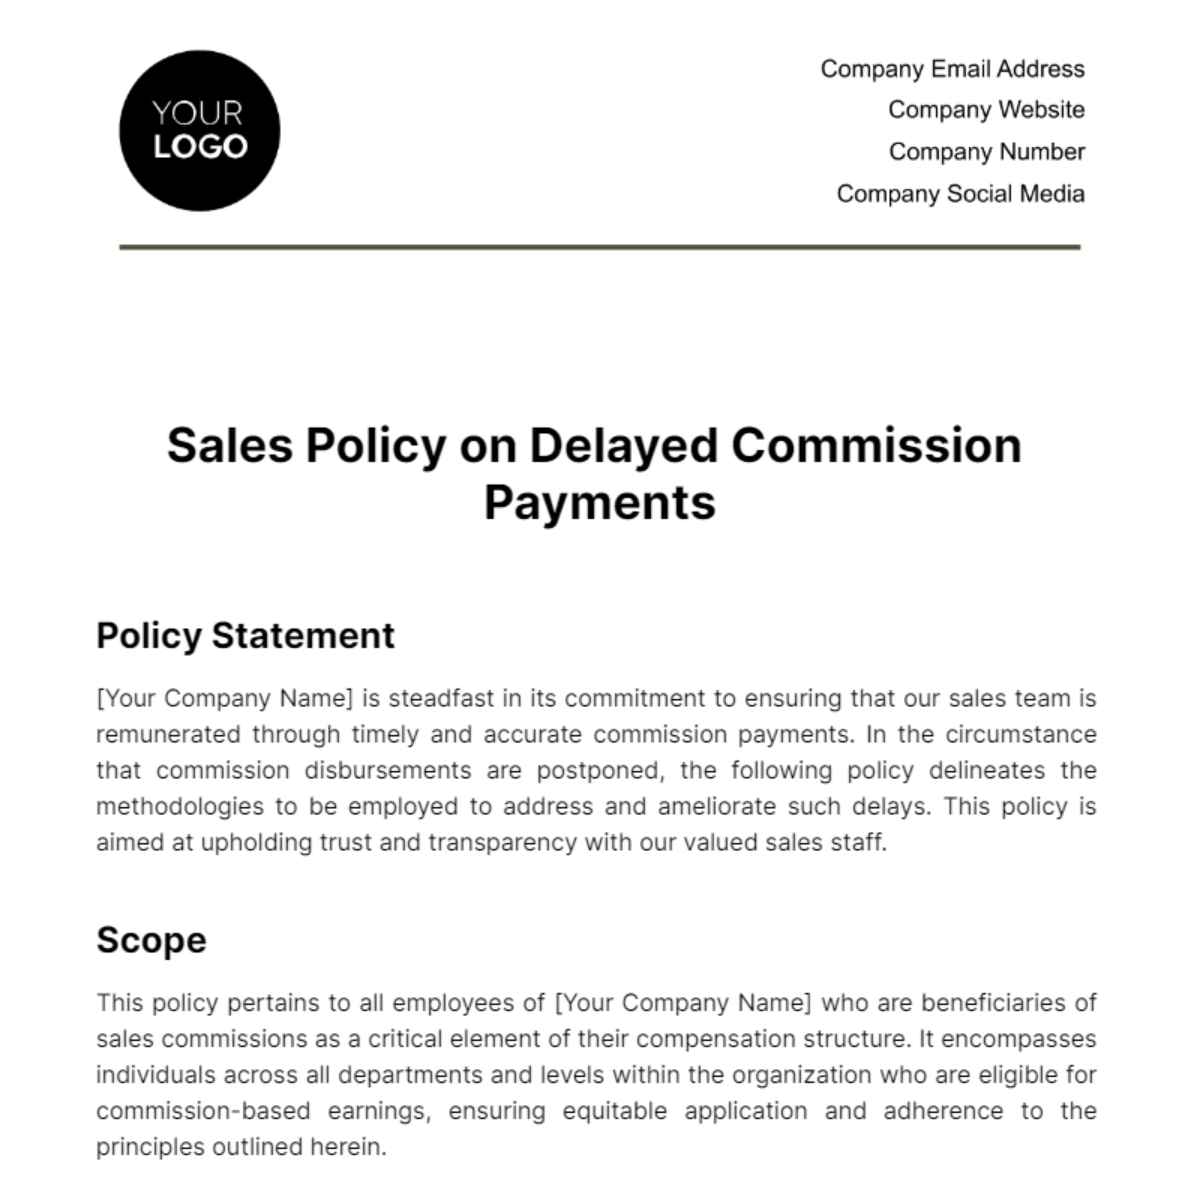 Free Sales Policy on Delayed Commission Payments Template